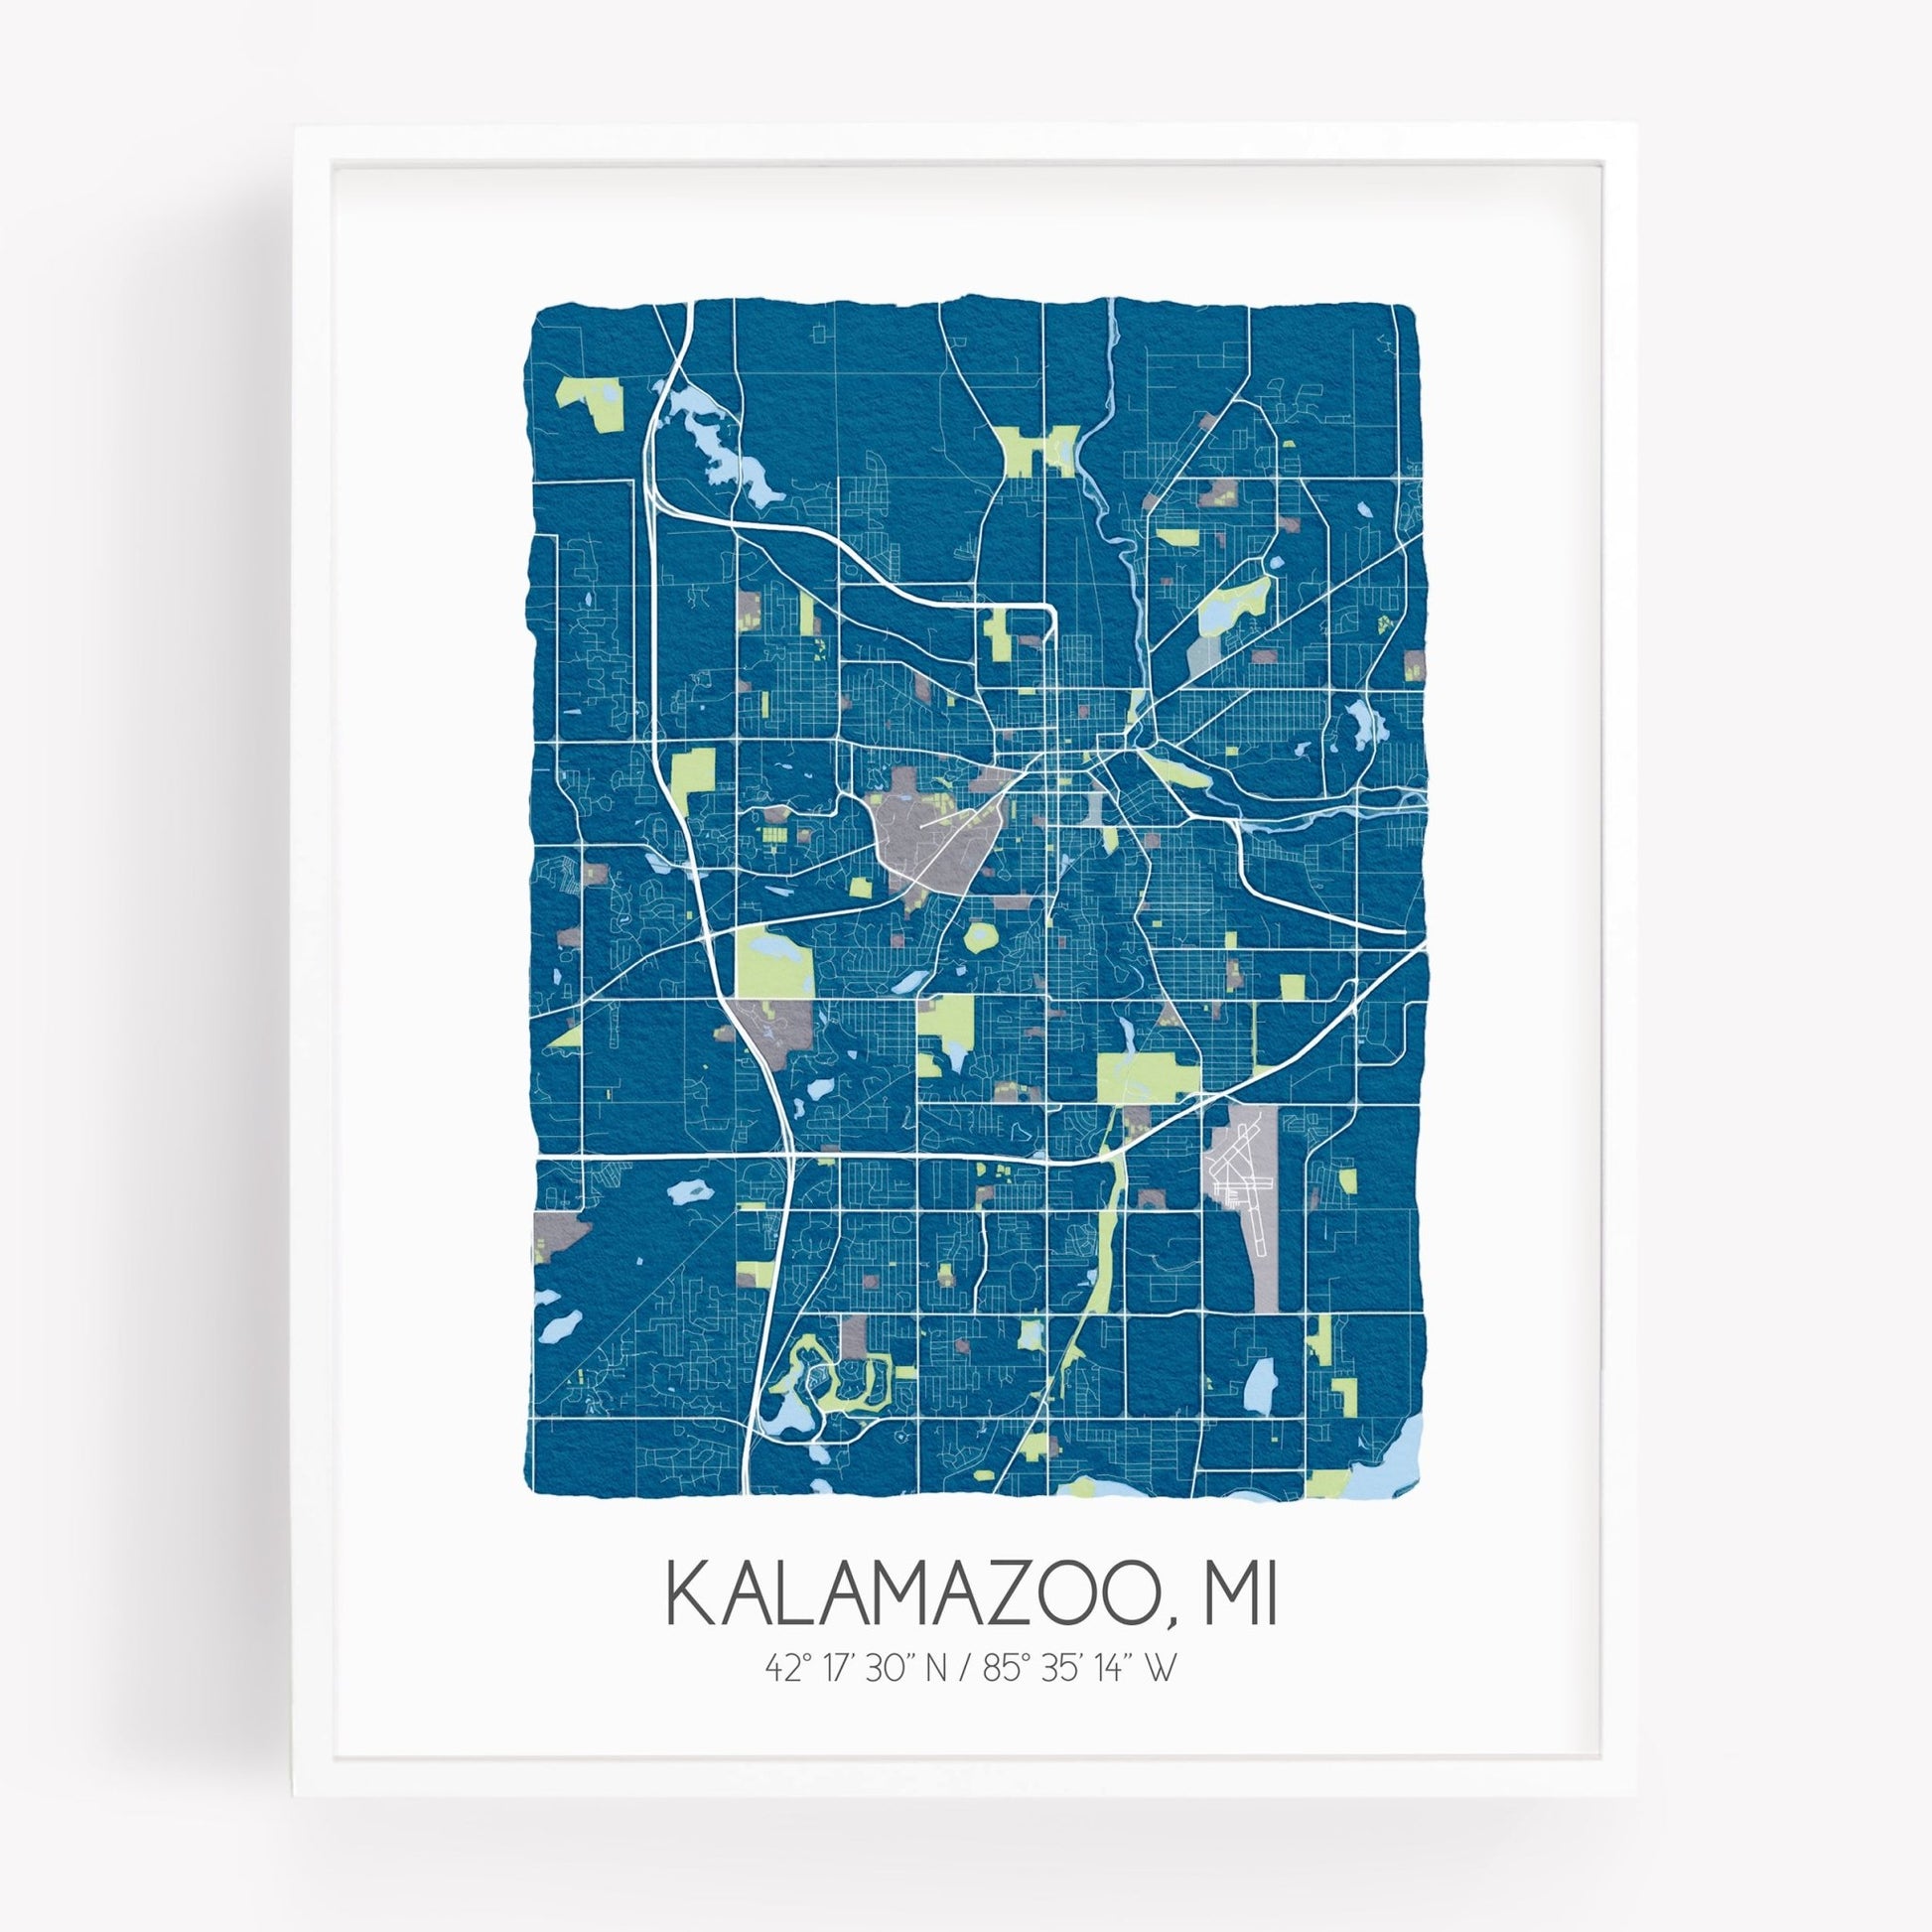 A city map print of Kalamazoo Michigan, in the color blue